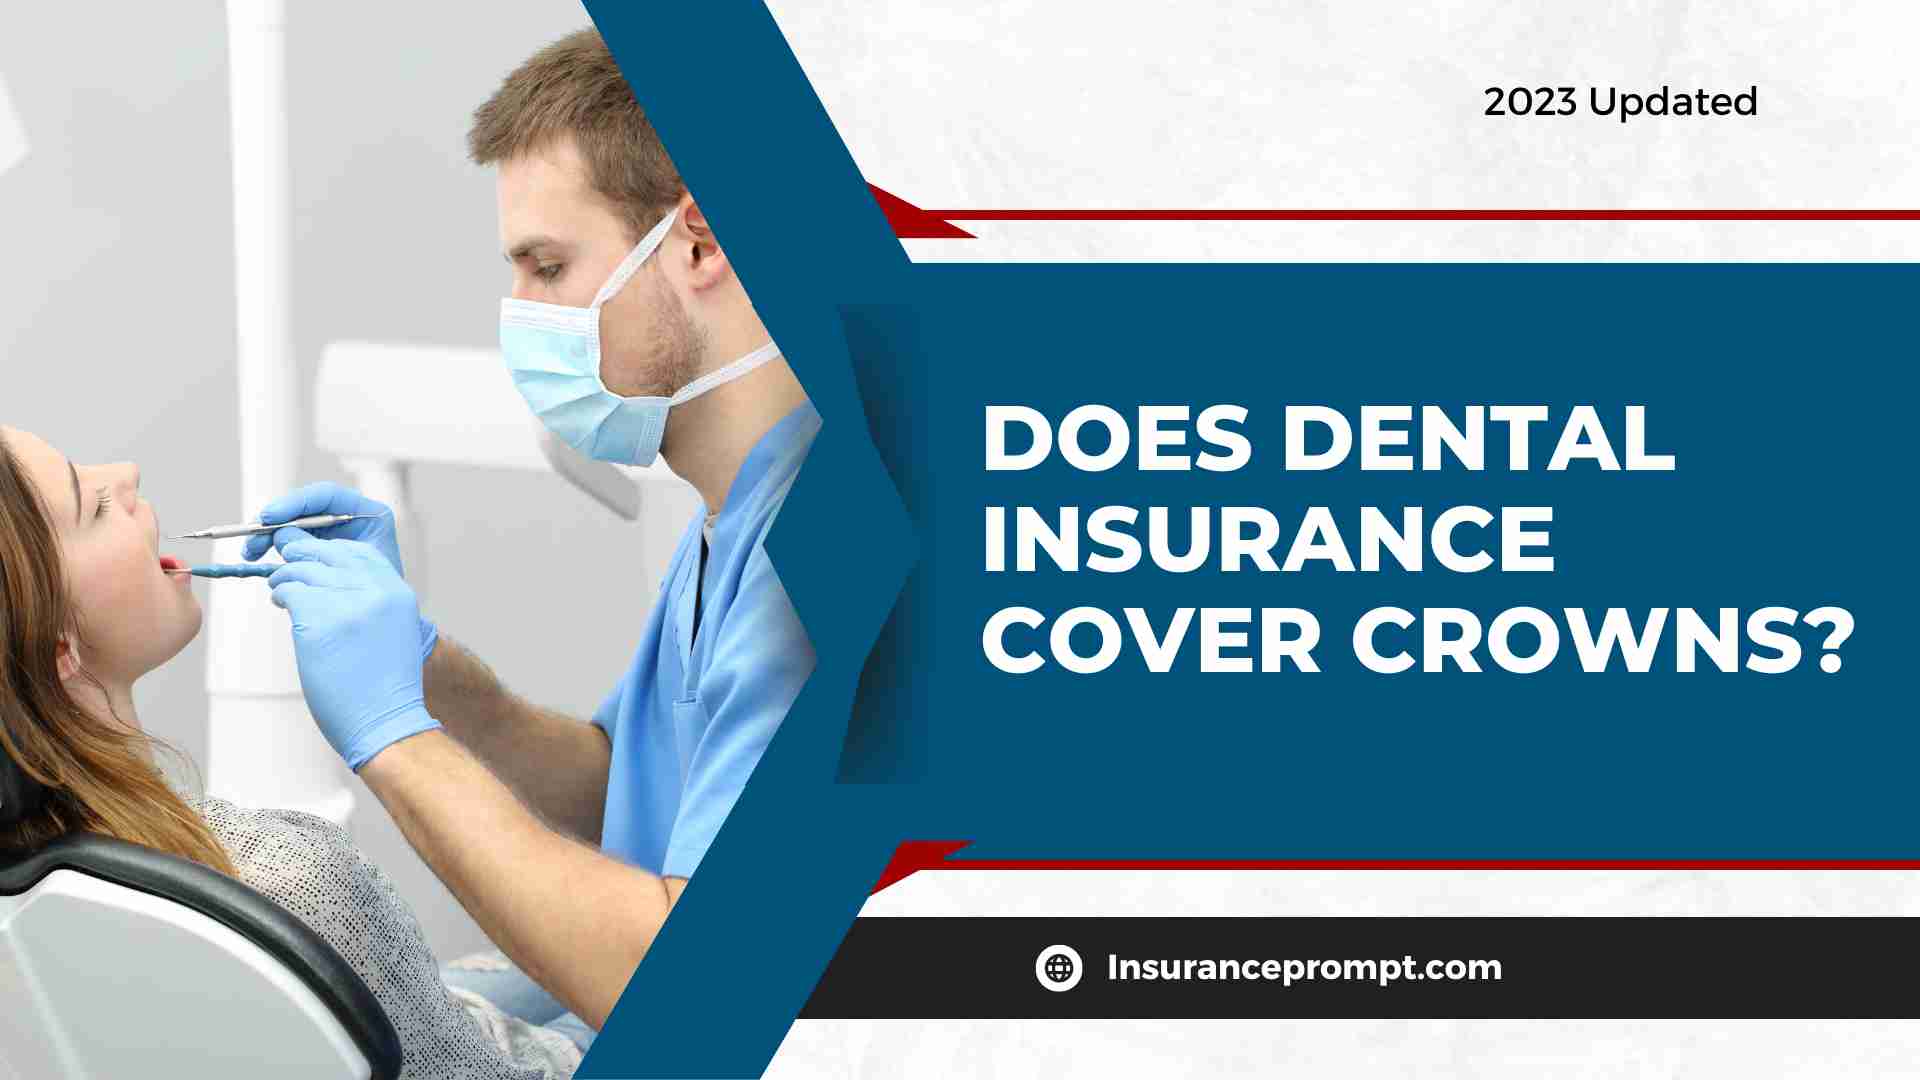 Does Dental Insurance Cover Crowns